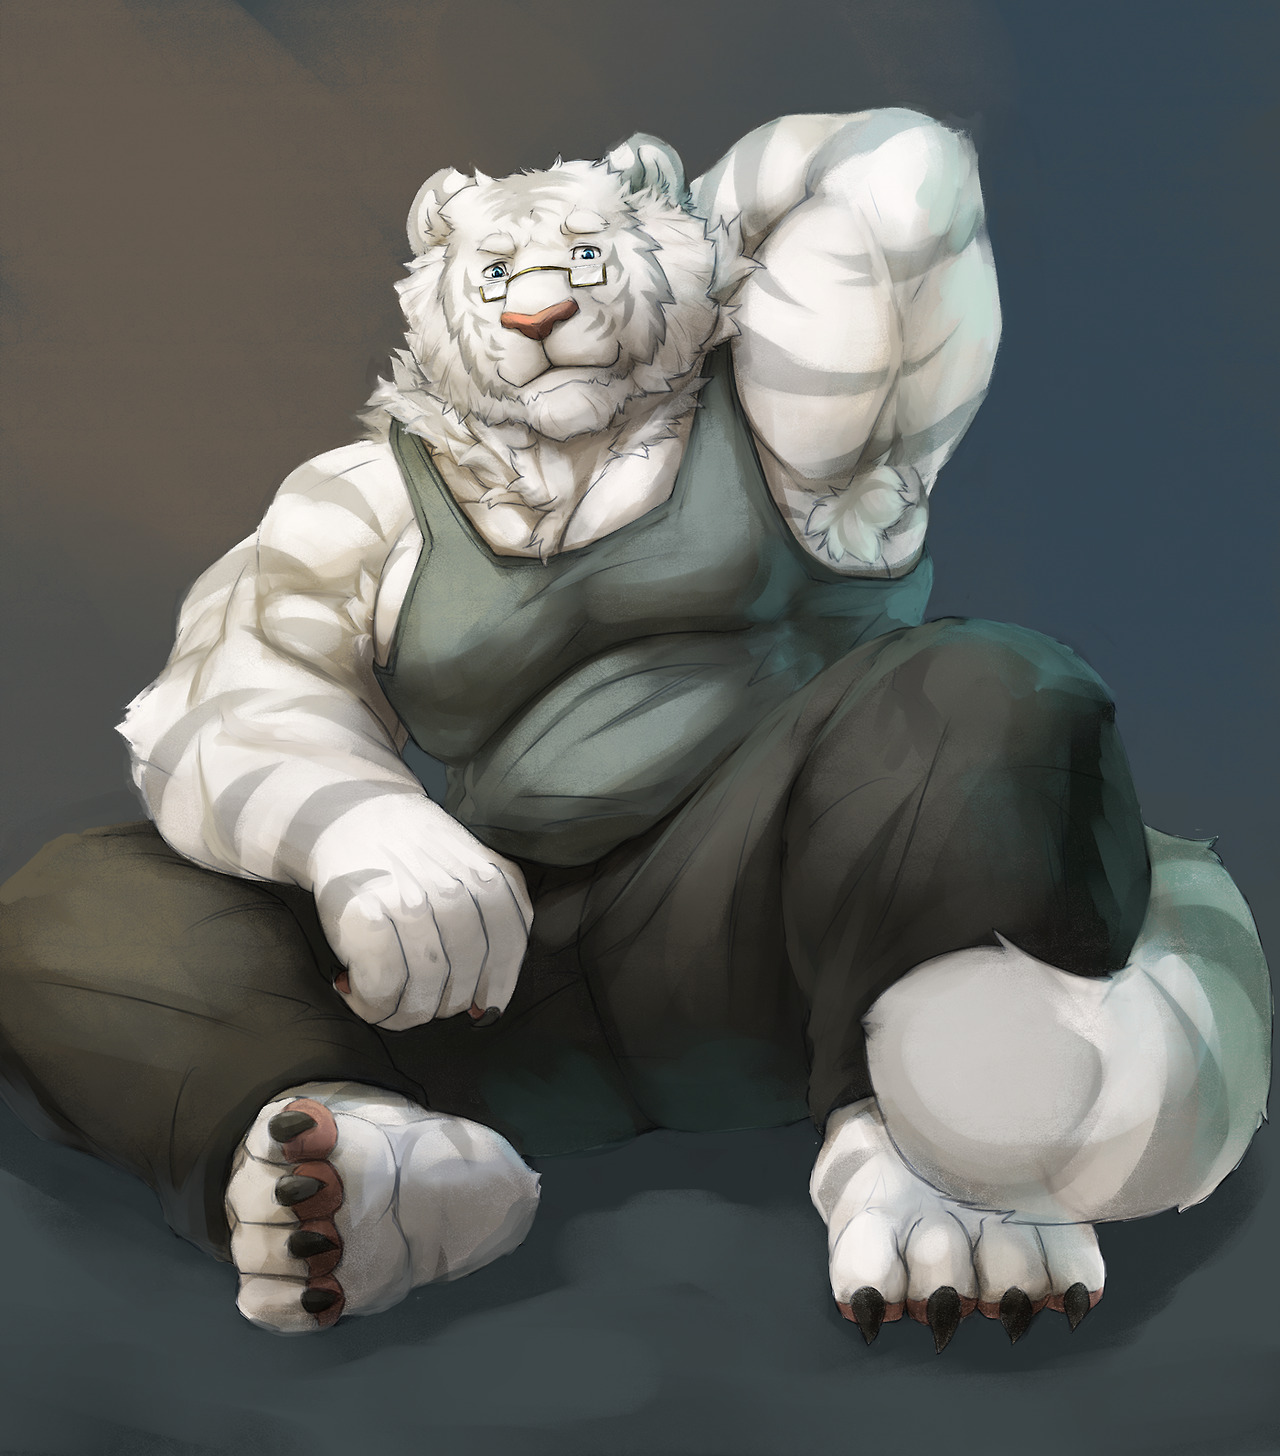 ralphthefeline:Just getting one more buff tiger Ralph drawing in because he had long